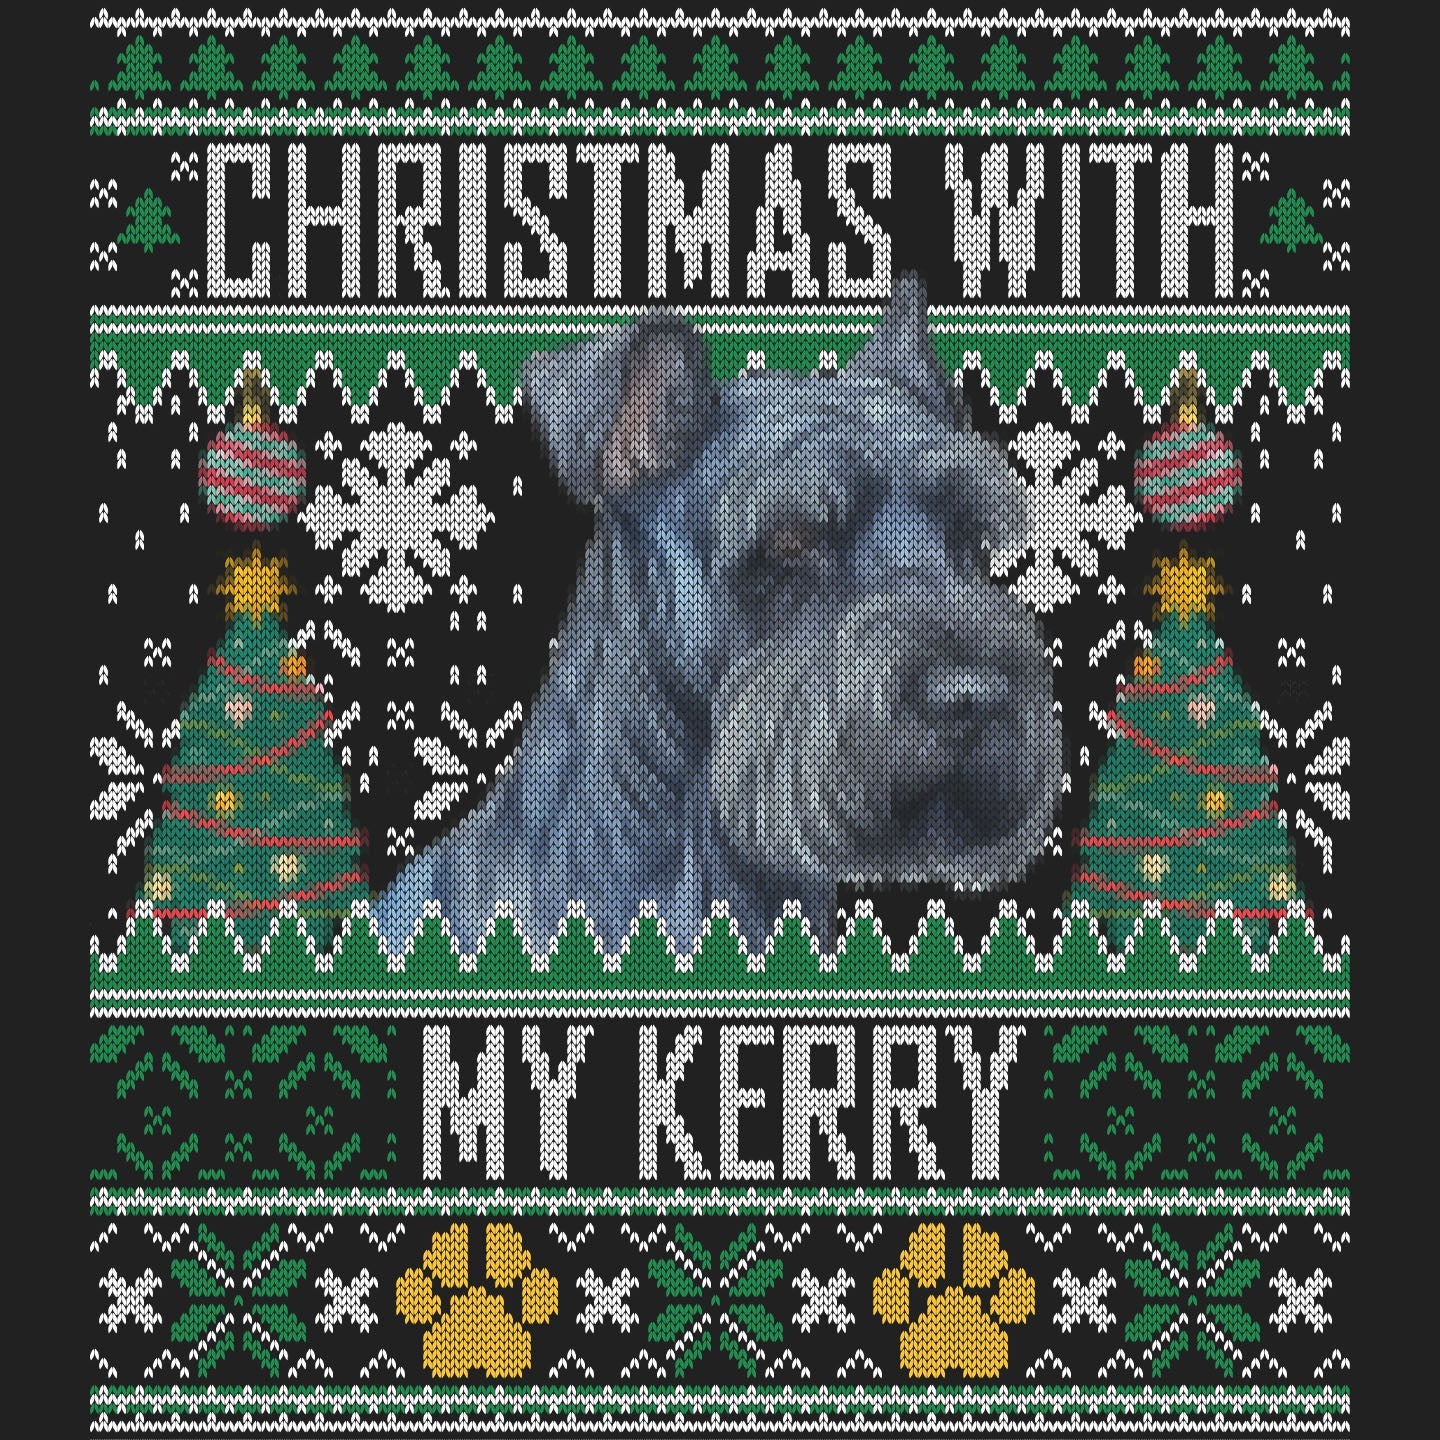 Ugly Sweater Christmas with My Kerry Blue Terrier - Women's V-Neck Long Sleeve T-Shirt